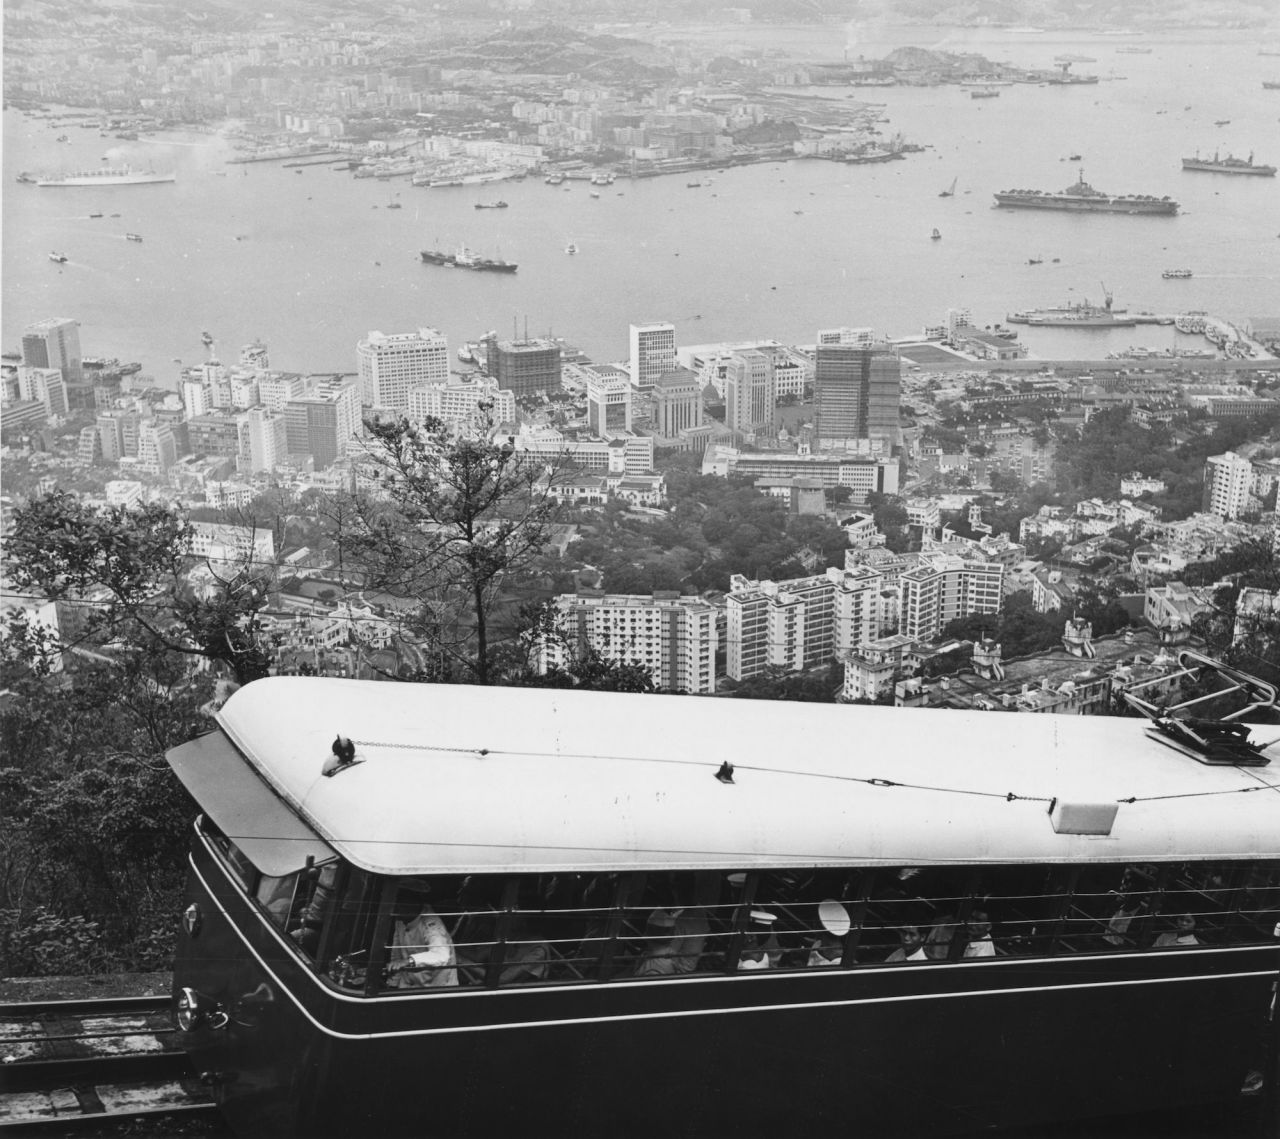 <strong>Circa 1960: </strong> A tram on its way to Victoria Peak, Hong Kong, with the city of Victoria below and Kowloon across the water.  During Hong Kong's stint as a British colony, from 1841 to 1997, The Peak was the city's most exclusive neighborhood.